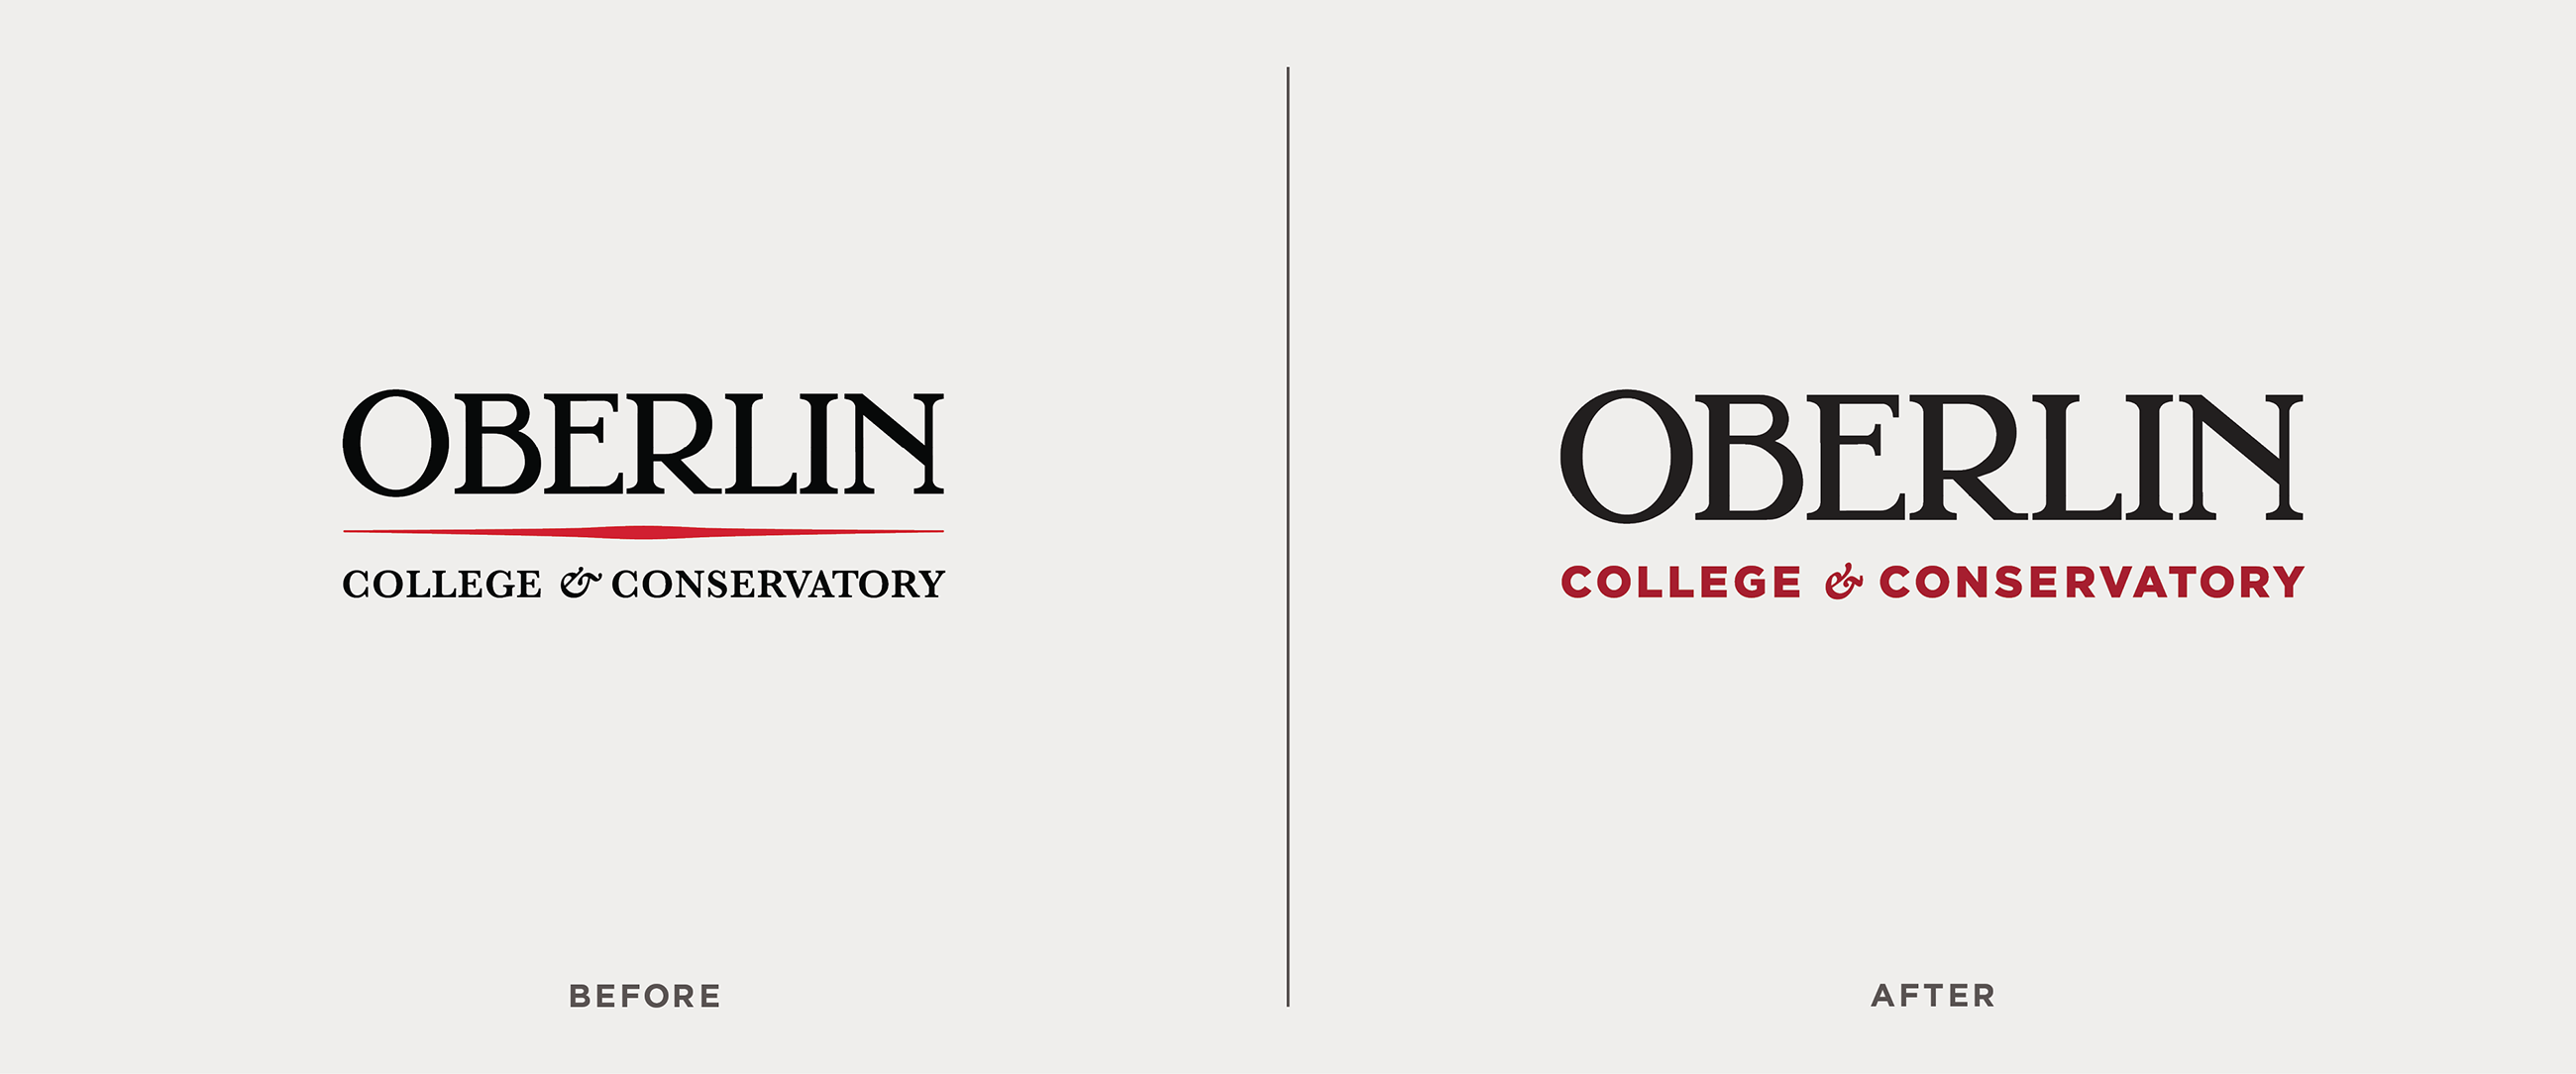 before-and-after Oberlin logo comparison.